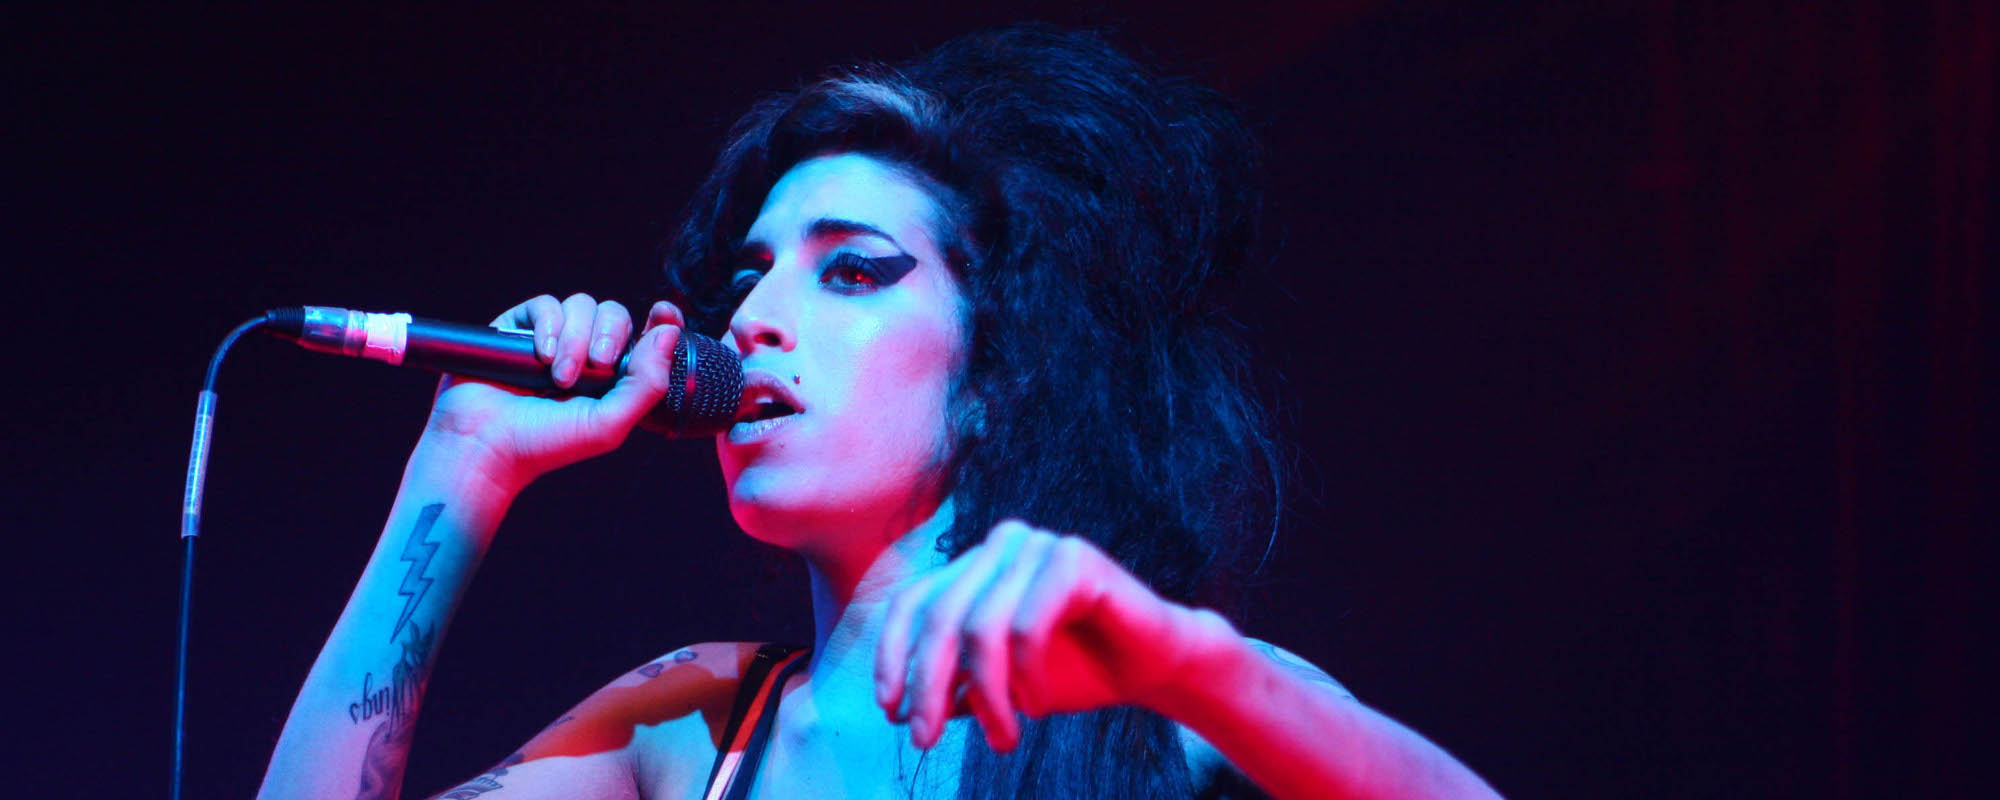 Amy Winehouse’s Former Husband Talks About Her Passing: “I’ve Carried That Burden”